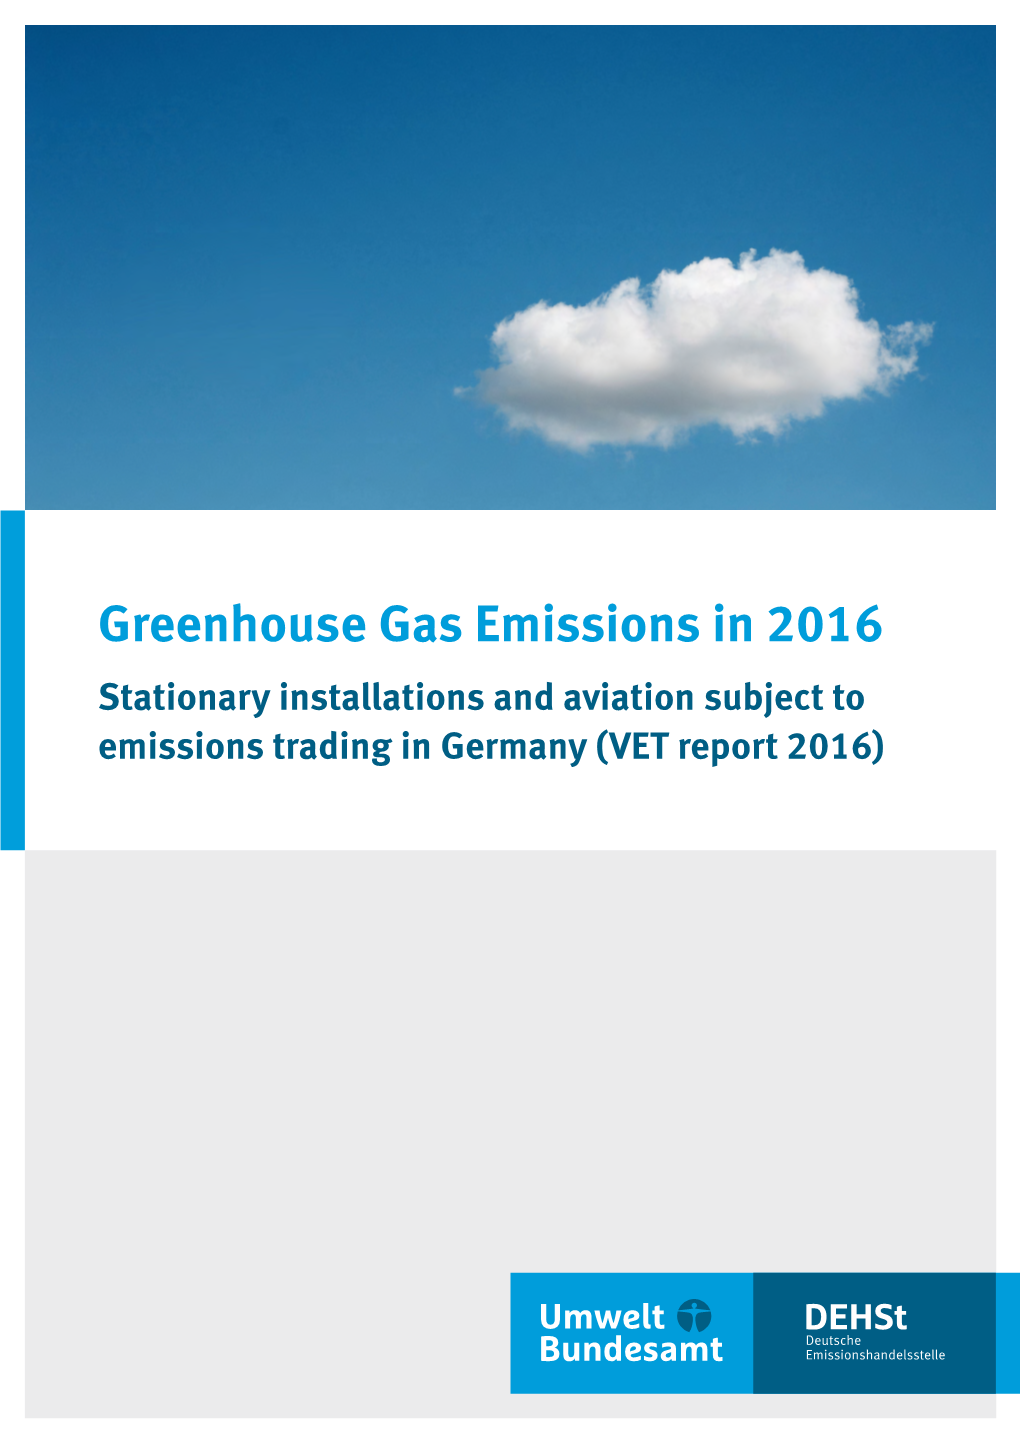 Greenhouse Gas Emissions in 2016 Stationary Installations and Aviation Subject to Emissions Trading in Germany (VET Report 2016) Editorial Information